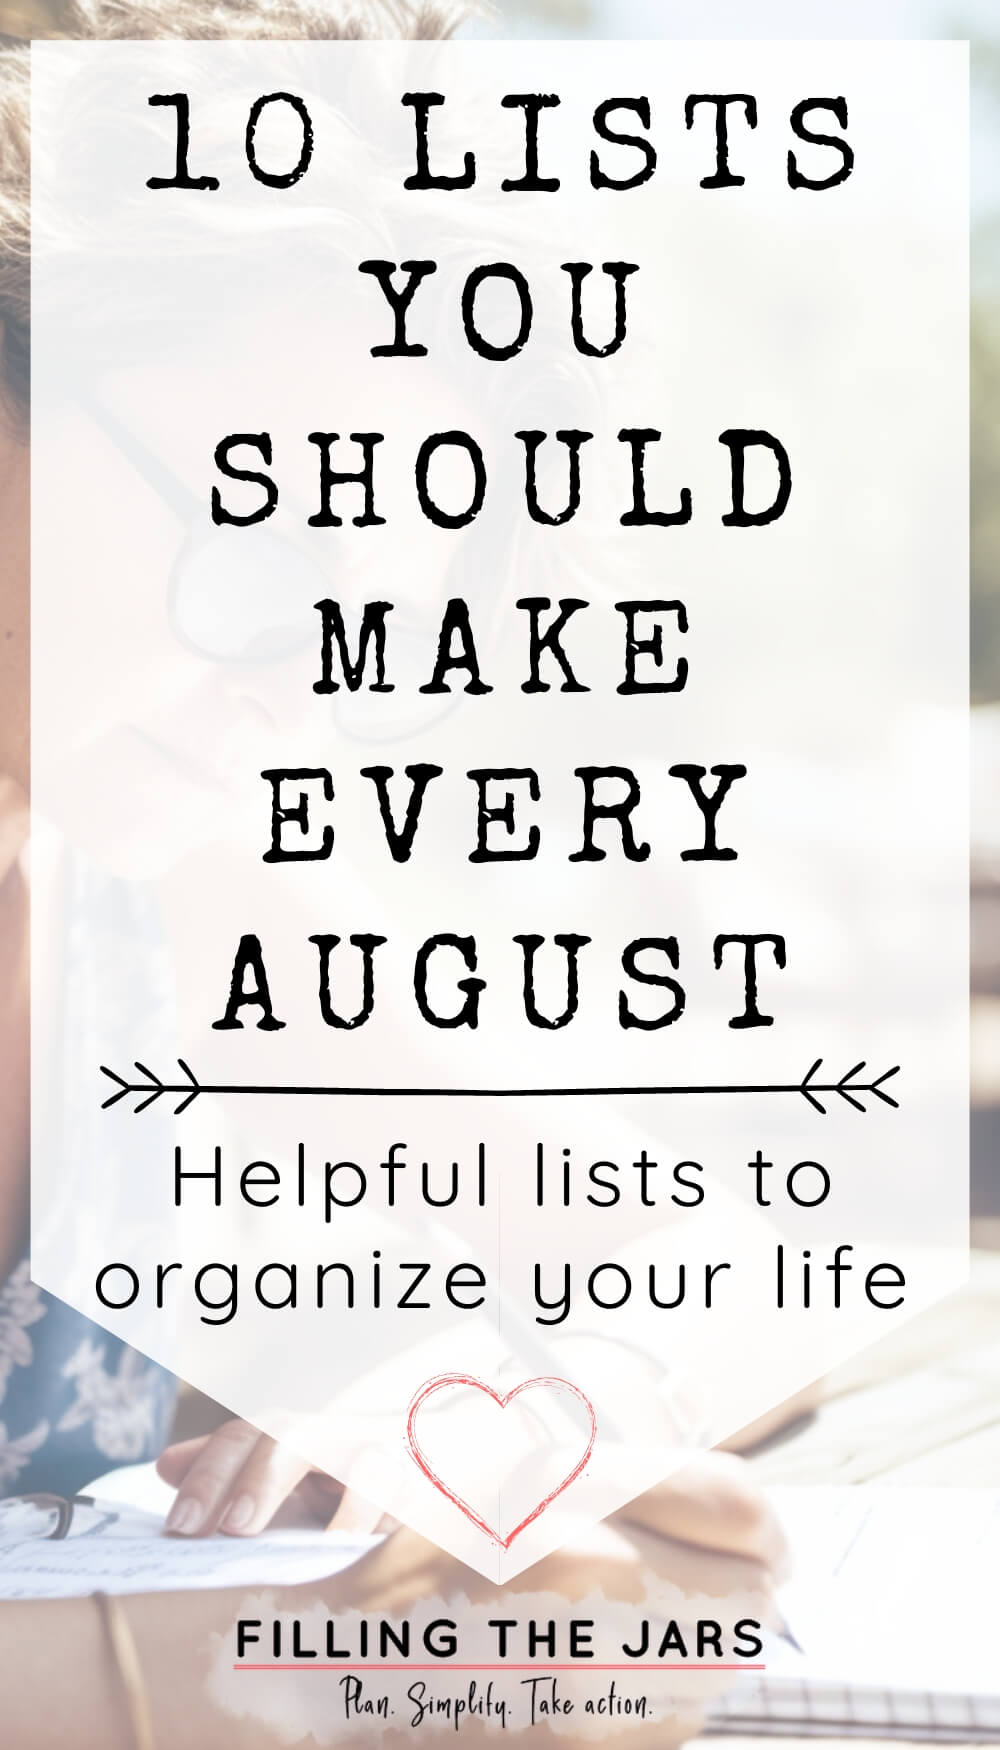 Text 10 lists you should make every August on white background.